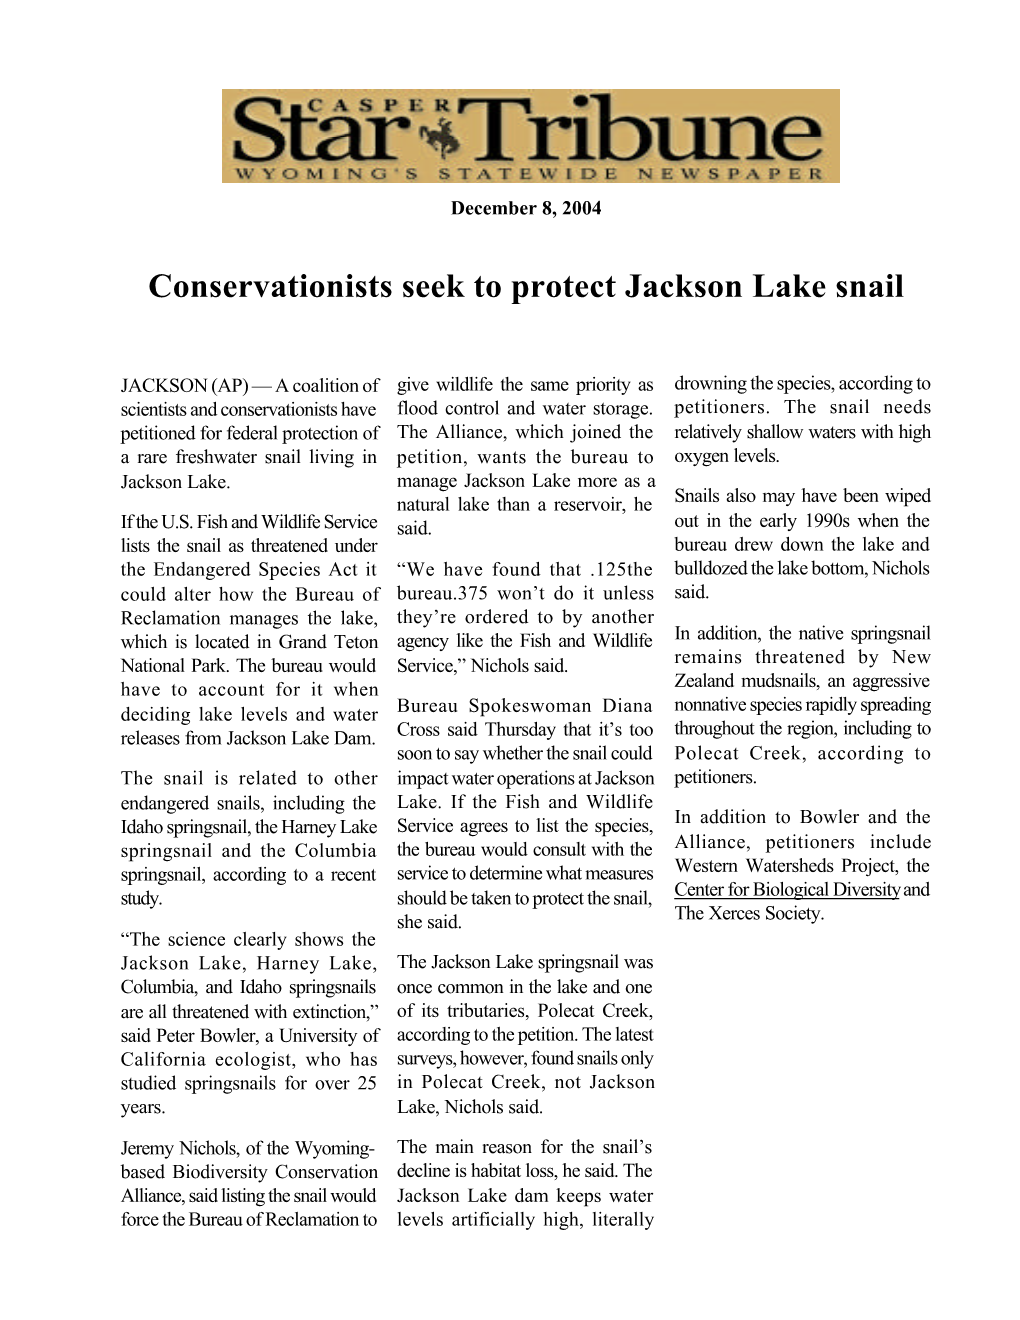 Conservationists Seek to Protect Jackson Lake Snail